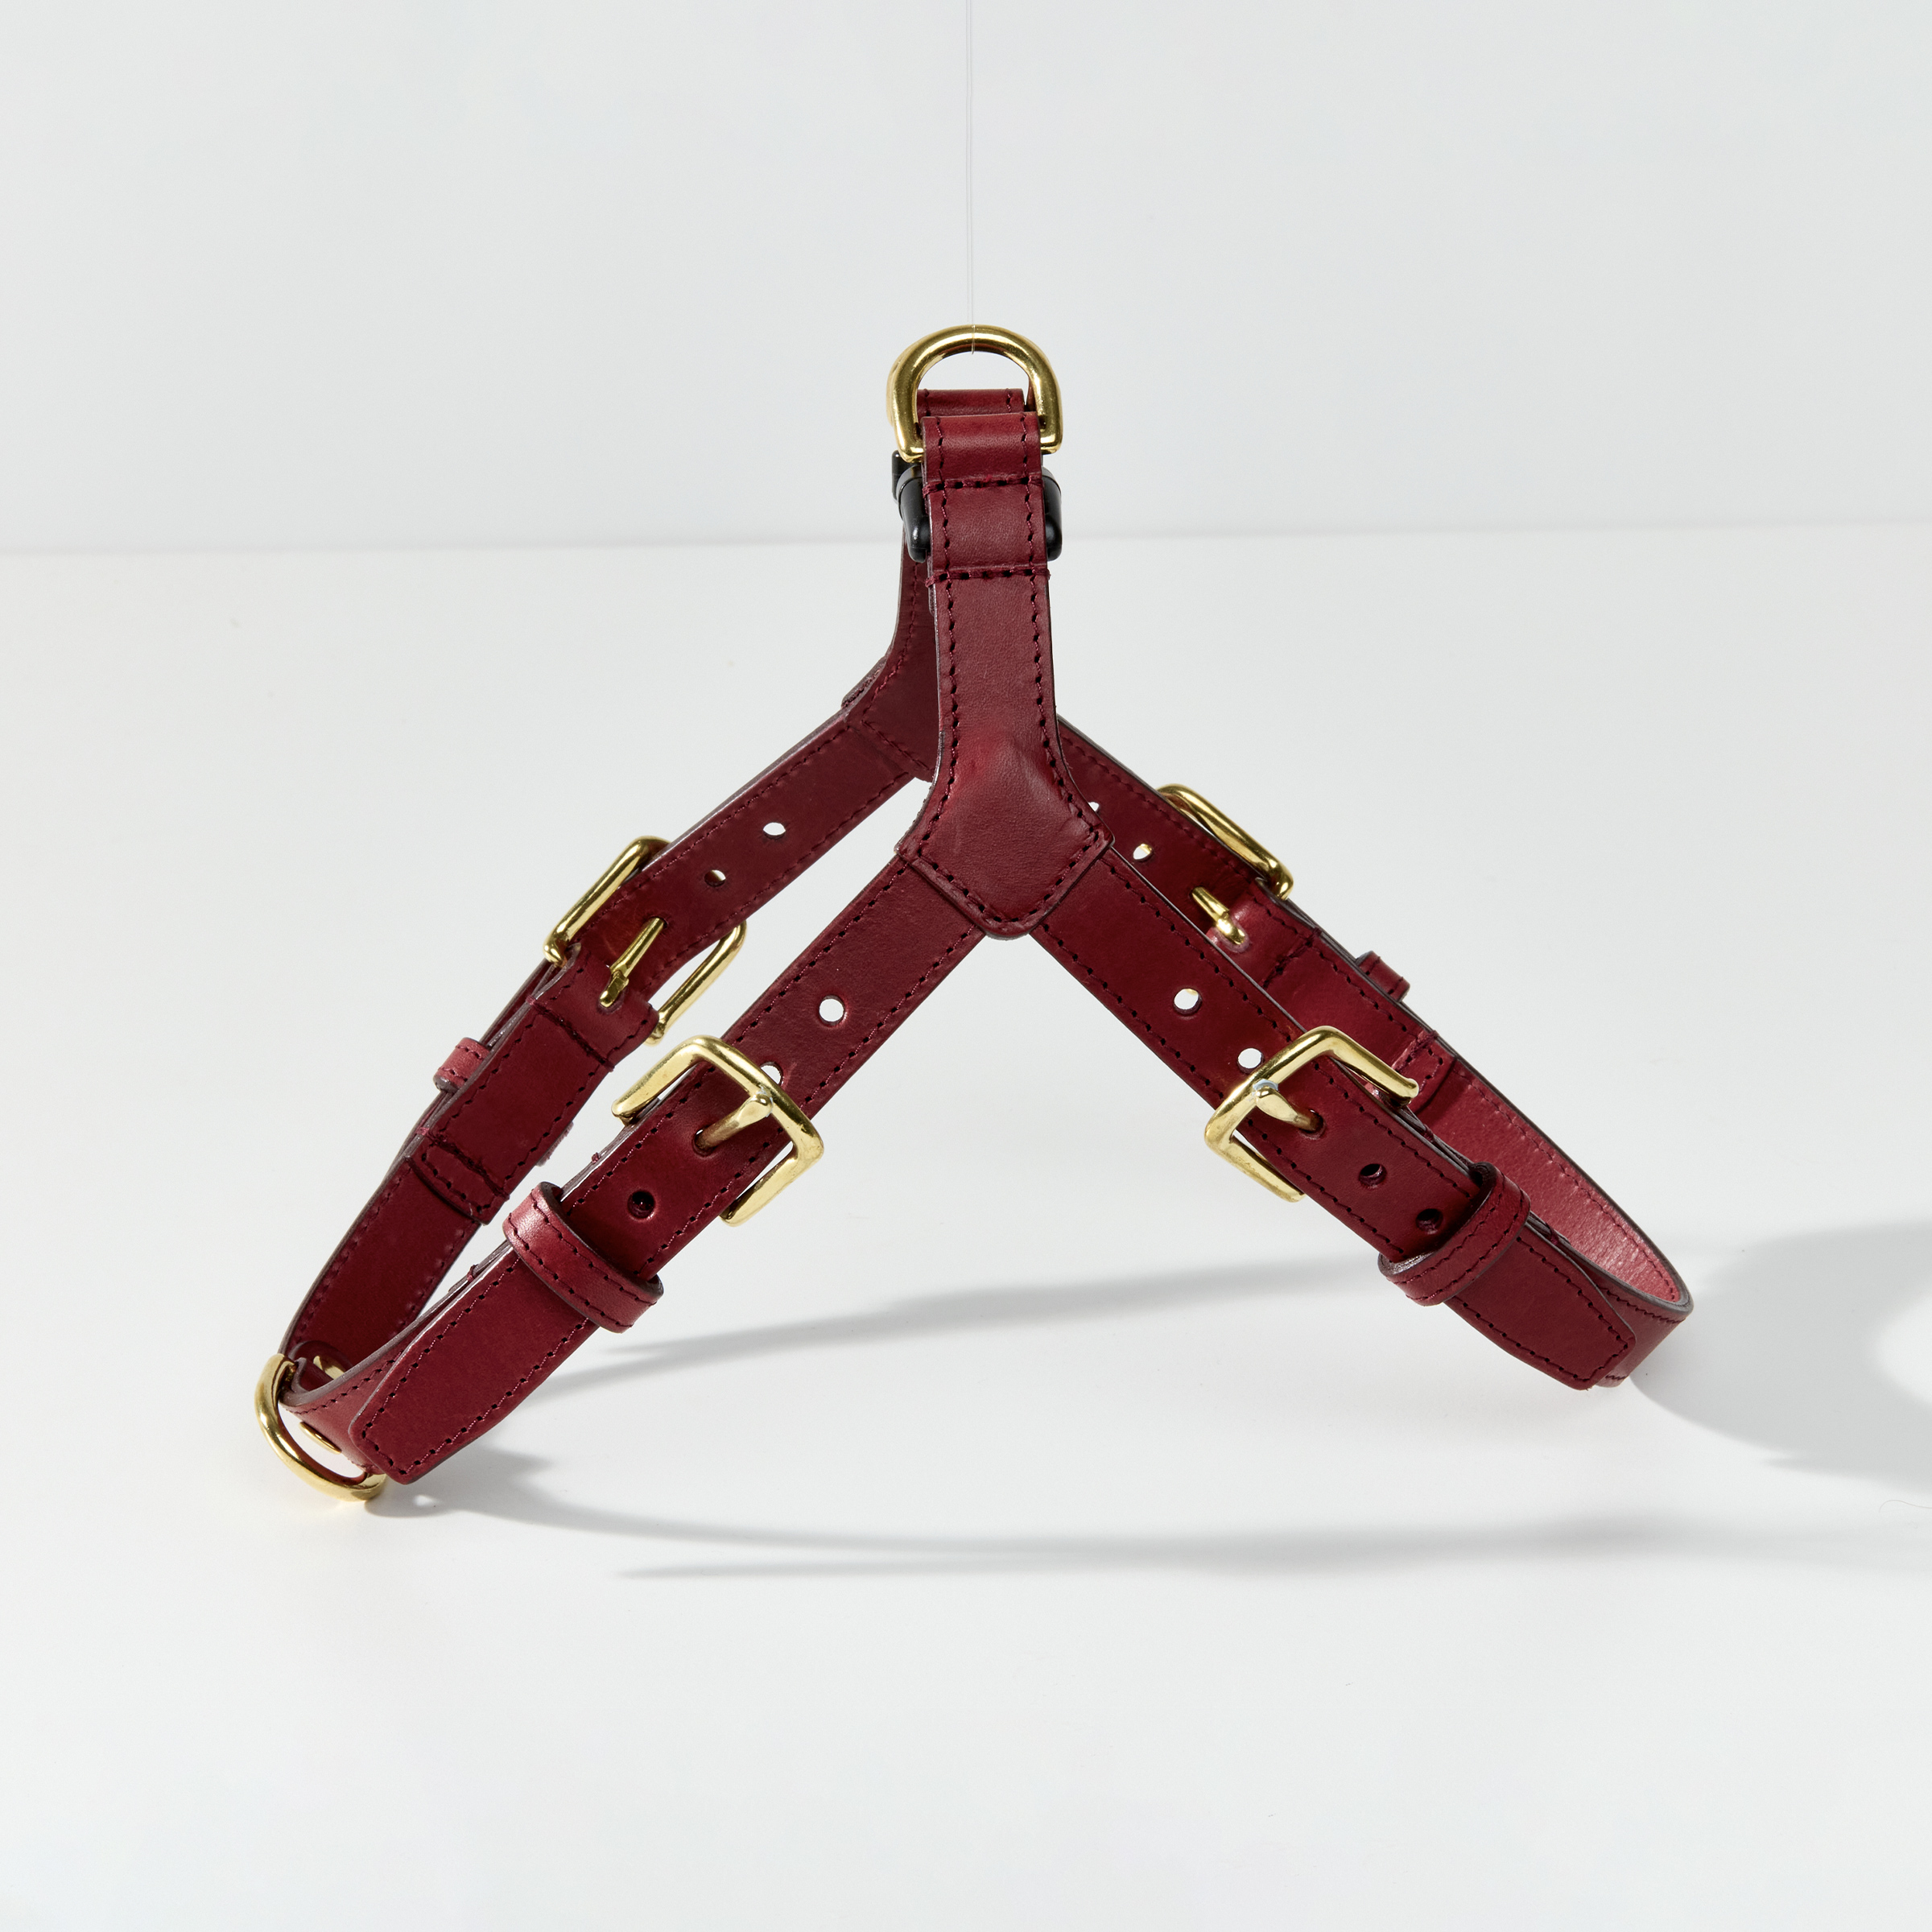 One-click Leather Dog Harness in Red